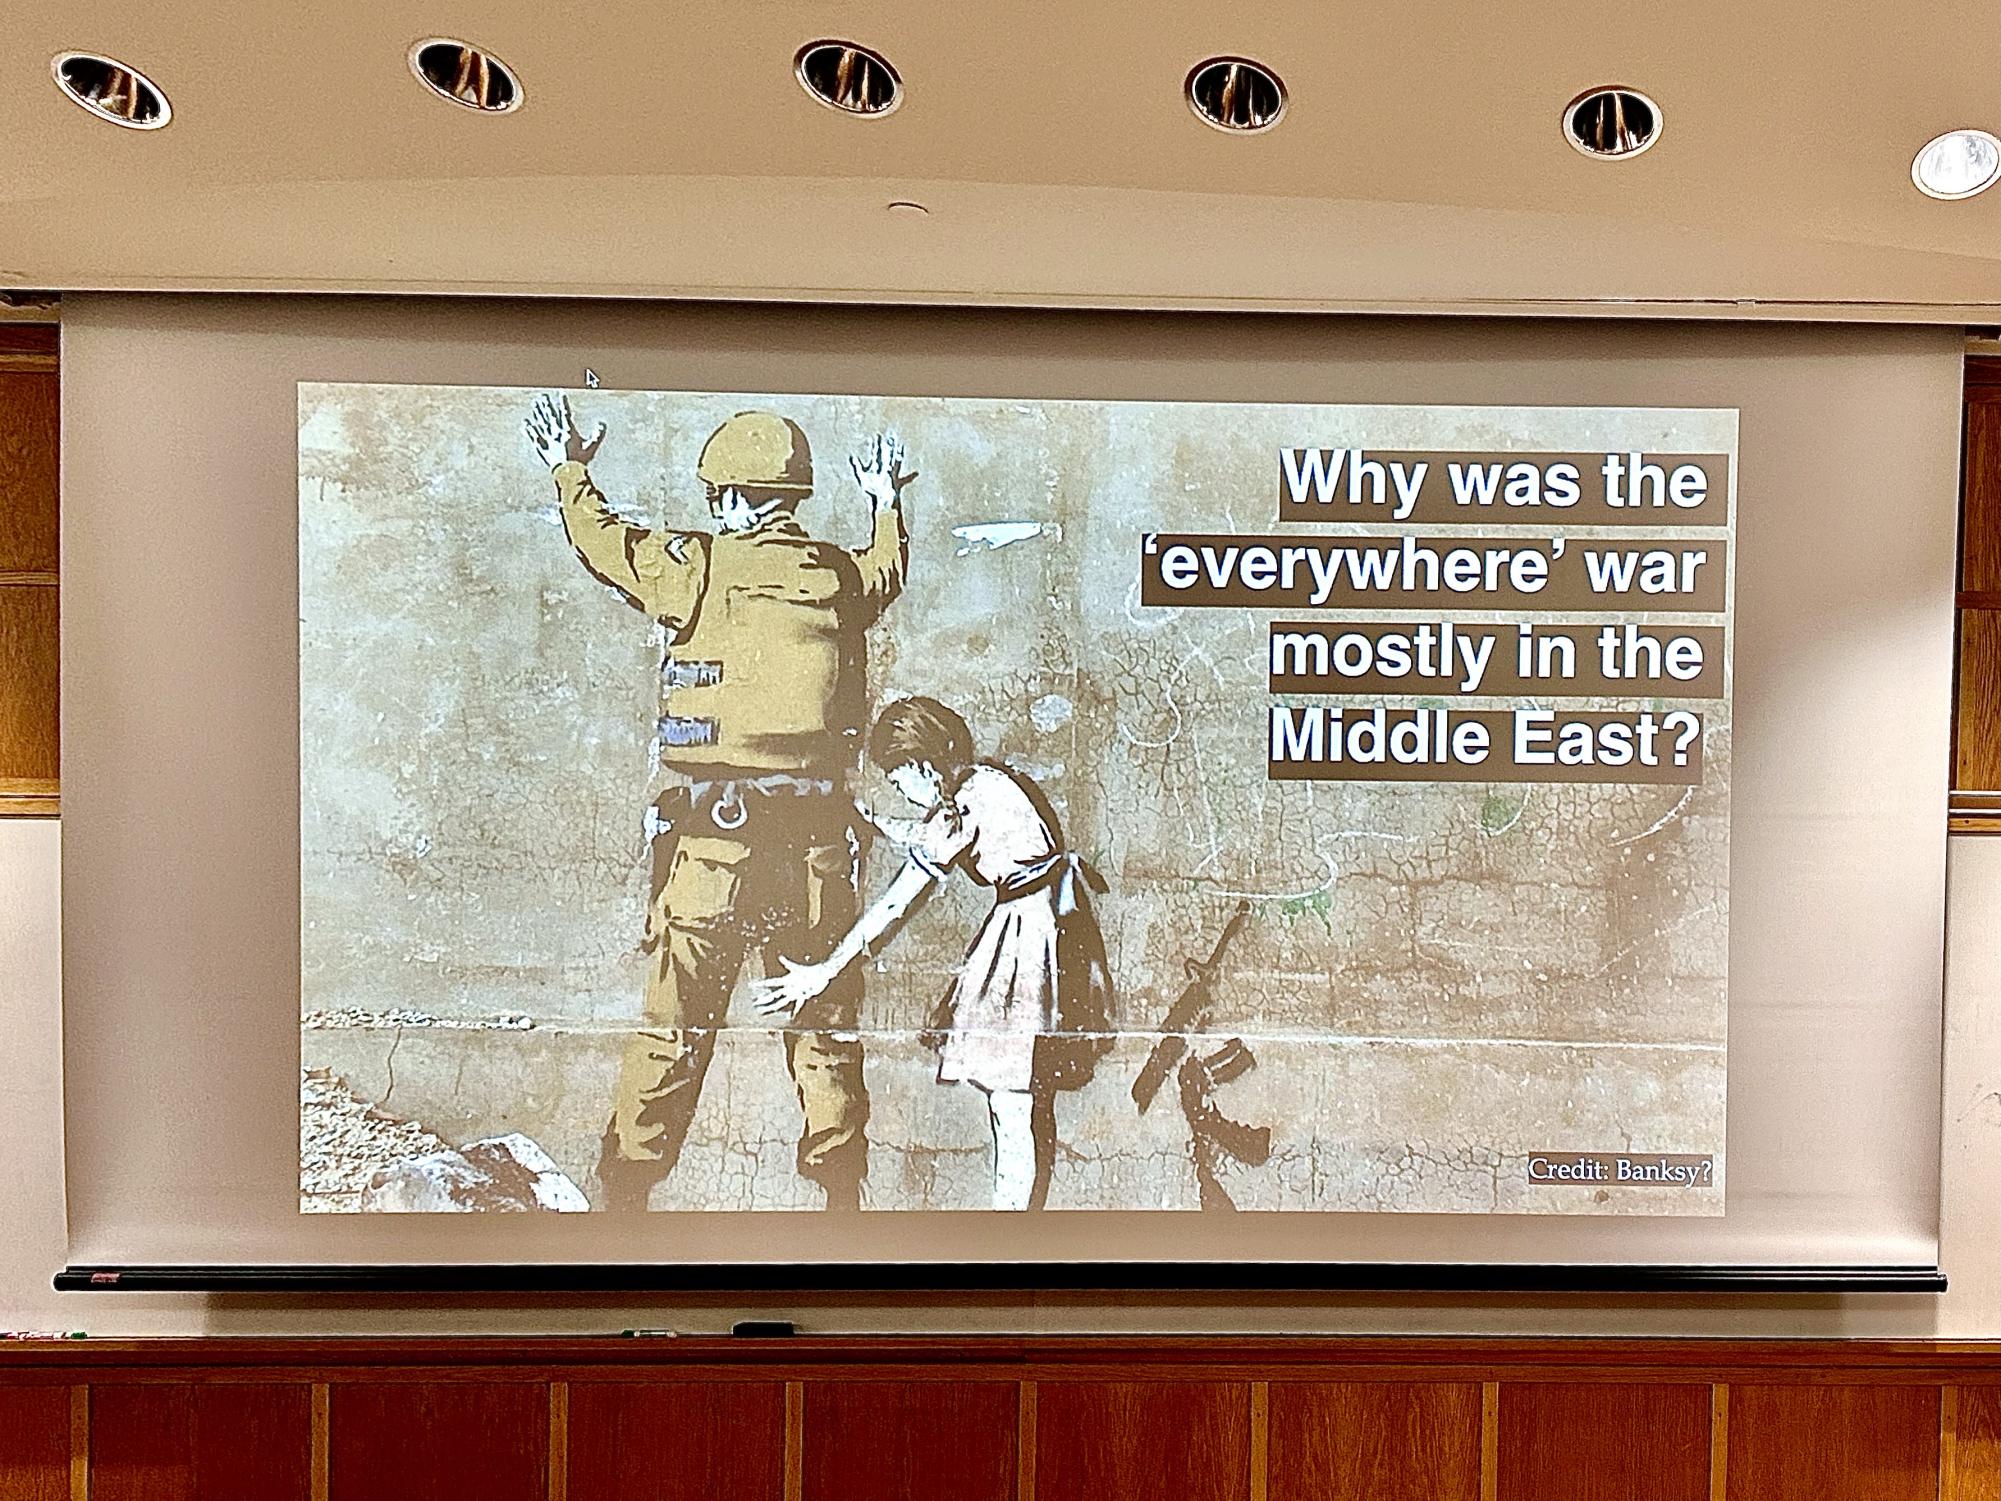 ‘Oil for Insecurity’: Professor Jacob Mundy Discusses the ‘Everywhere’ War in the Middle East